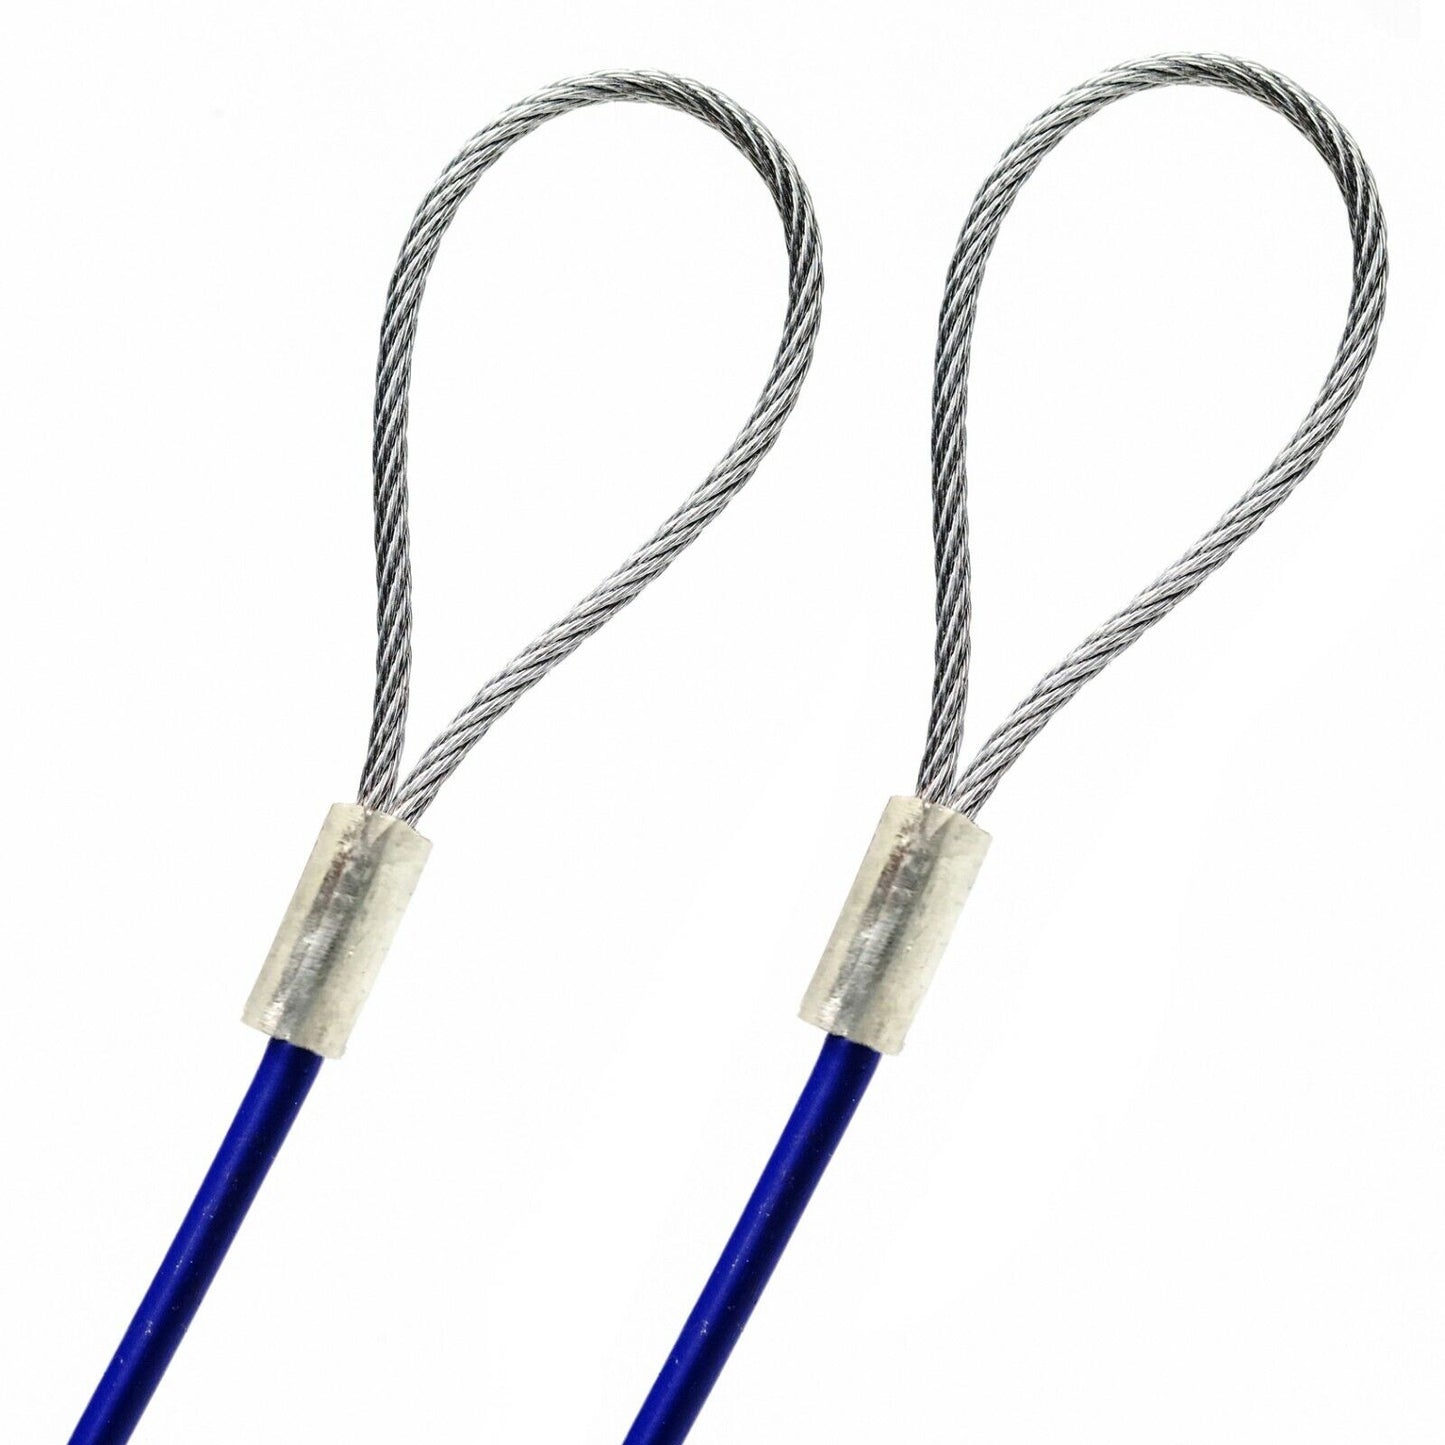 101-200ft Order To Size 1/8 Galvanized Steel Cable BLUE Vinyl Coated To 3/16 Made To Order In USA